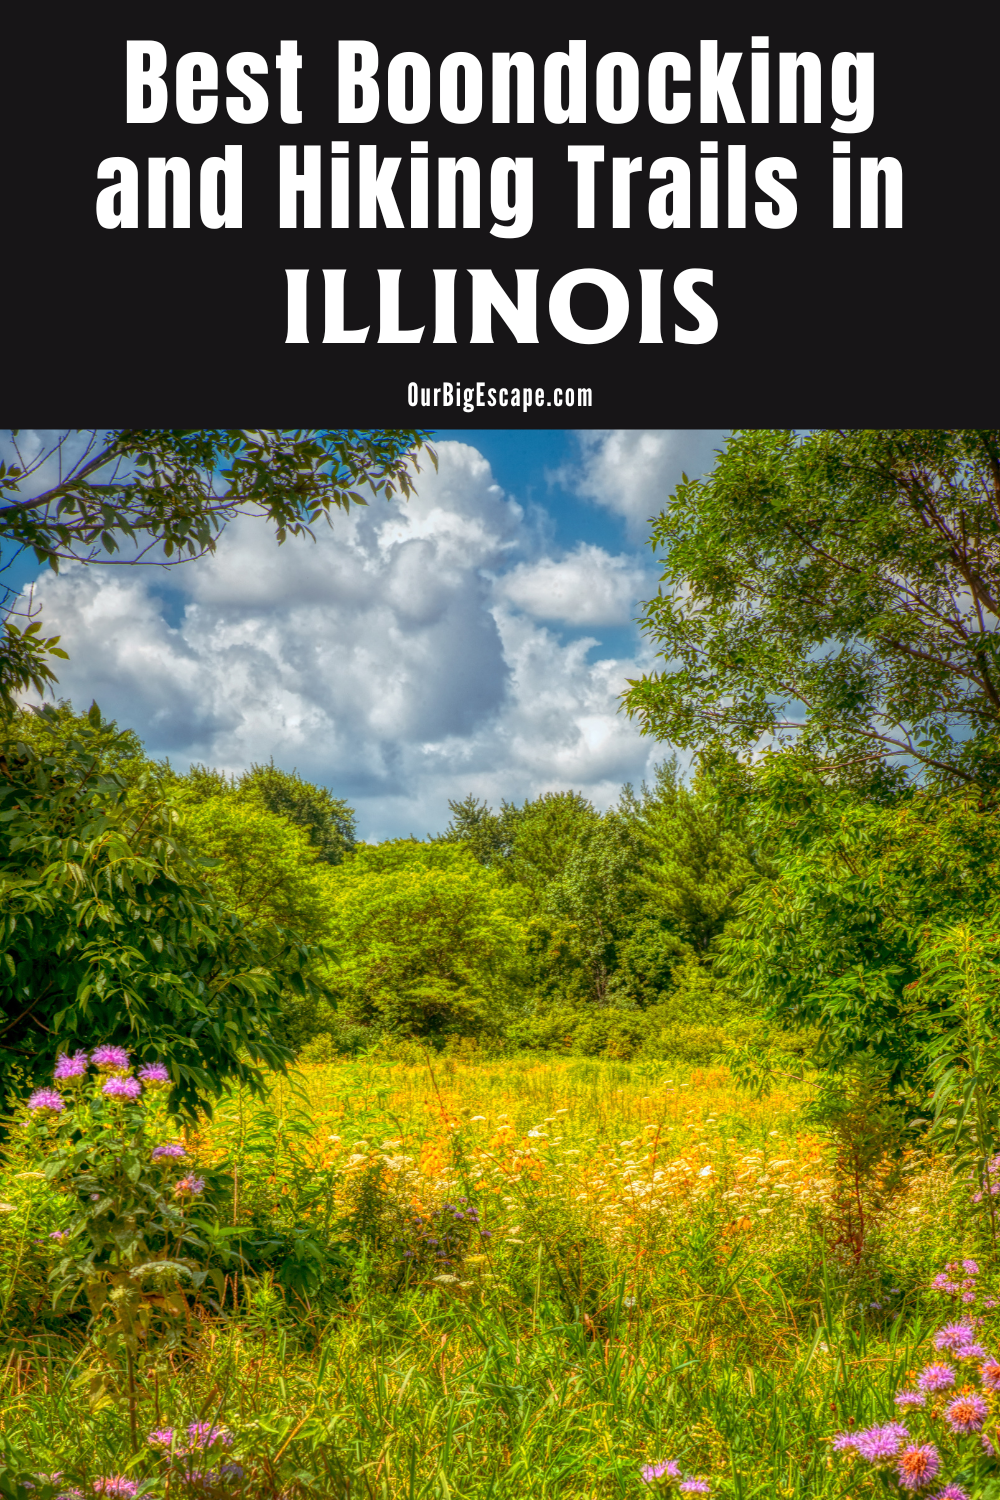 Best Boondocking and Hiking Trails in Illinois